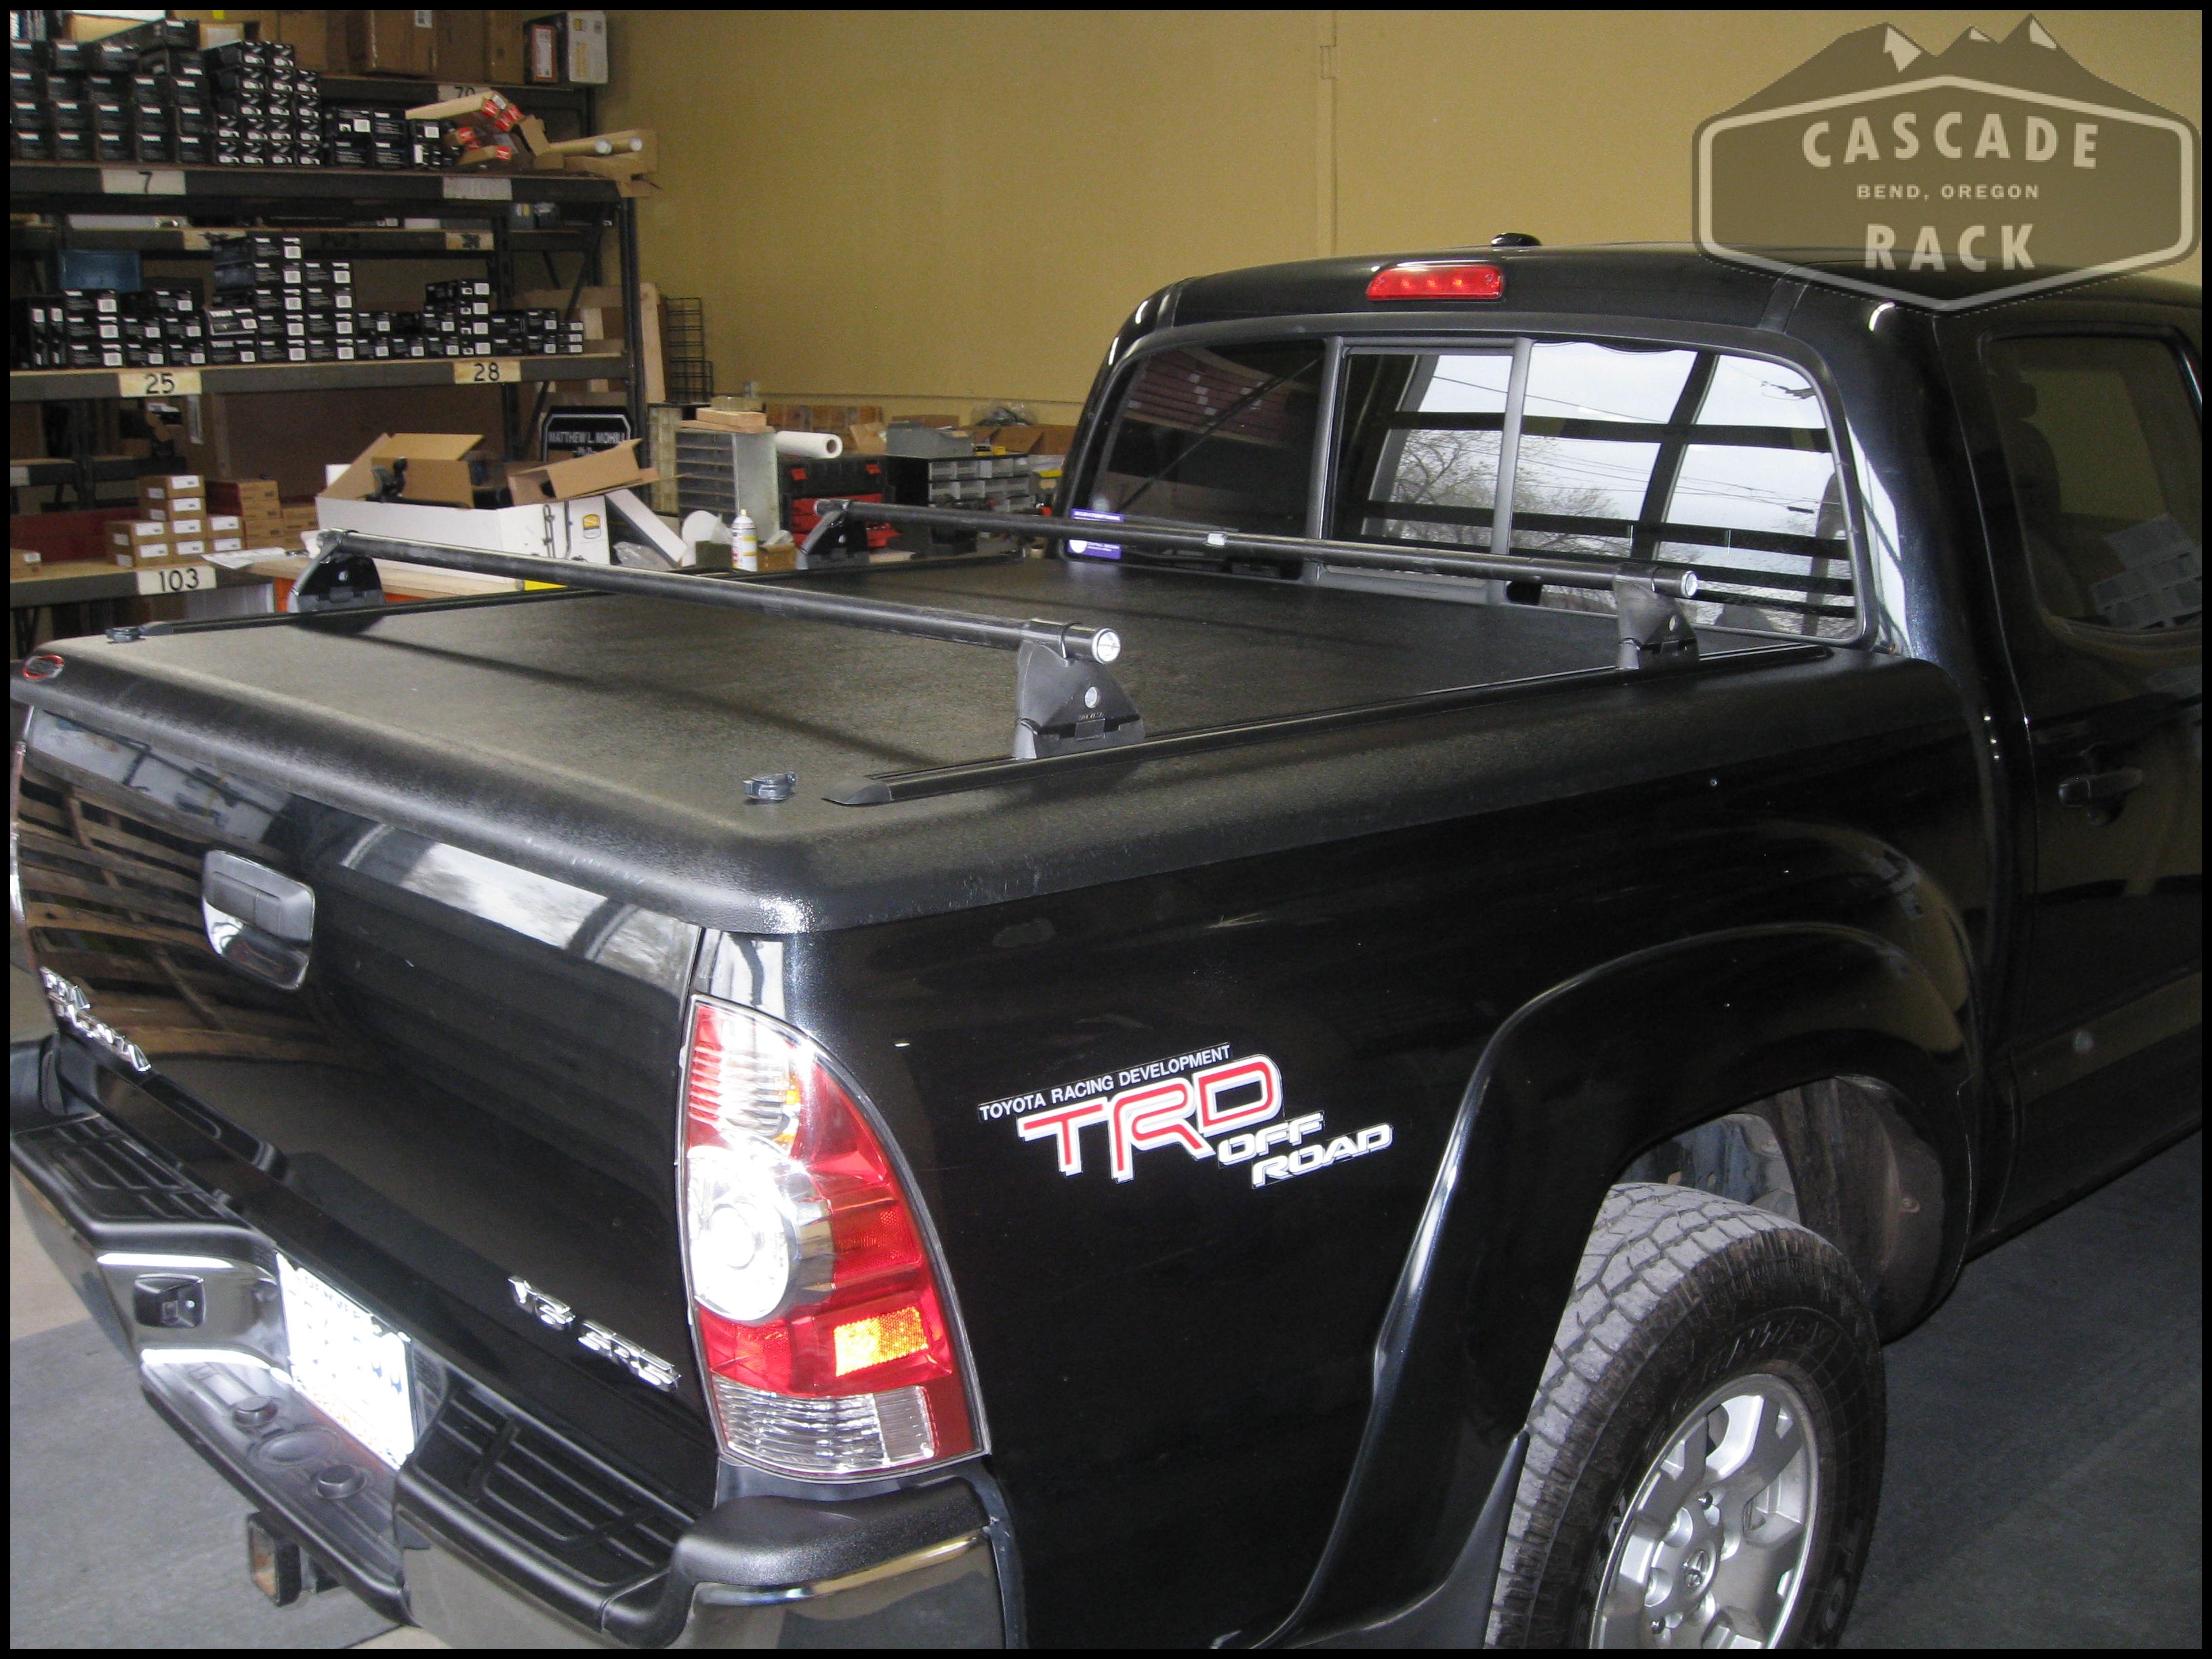 Full Image for Toyota Truck Bed Cover 76 Toyota Pickup Truck Bed Covers Cascade Rack Installation